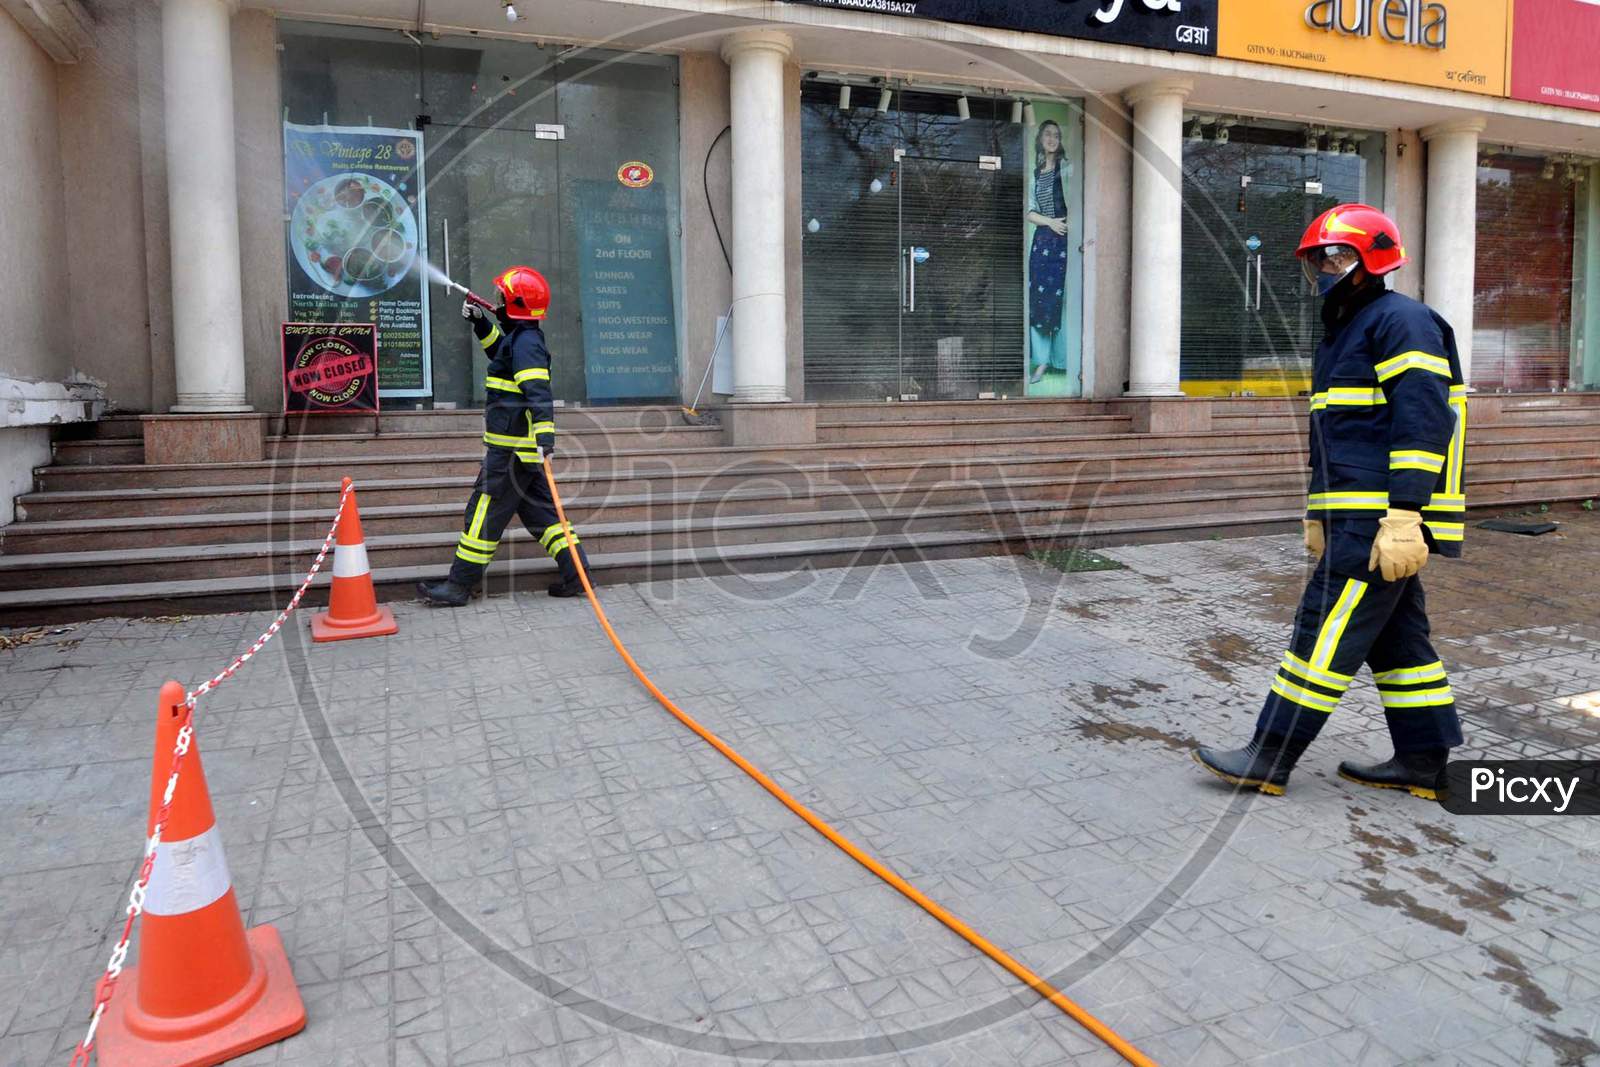 Firefighters Spray Disinfectants On Streets To Contain The Spread Of Coronavirus During The Nationwide Lockdown, In Guwahati, Saturday, April  4, 2020.